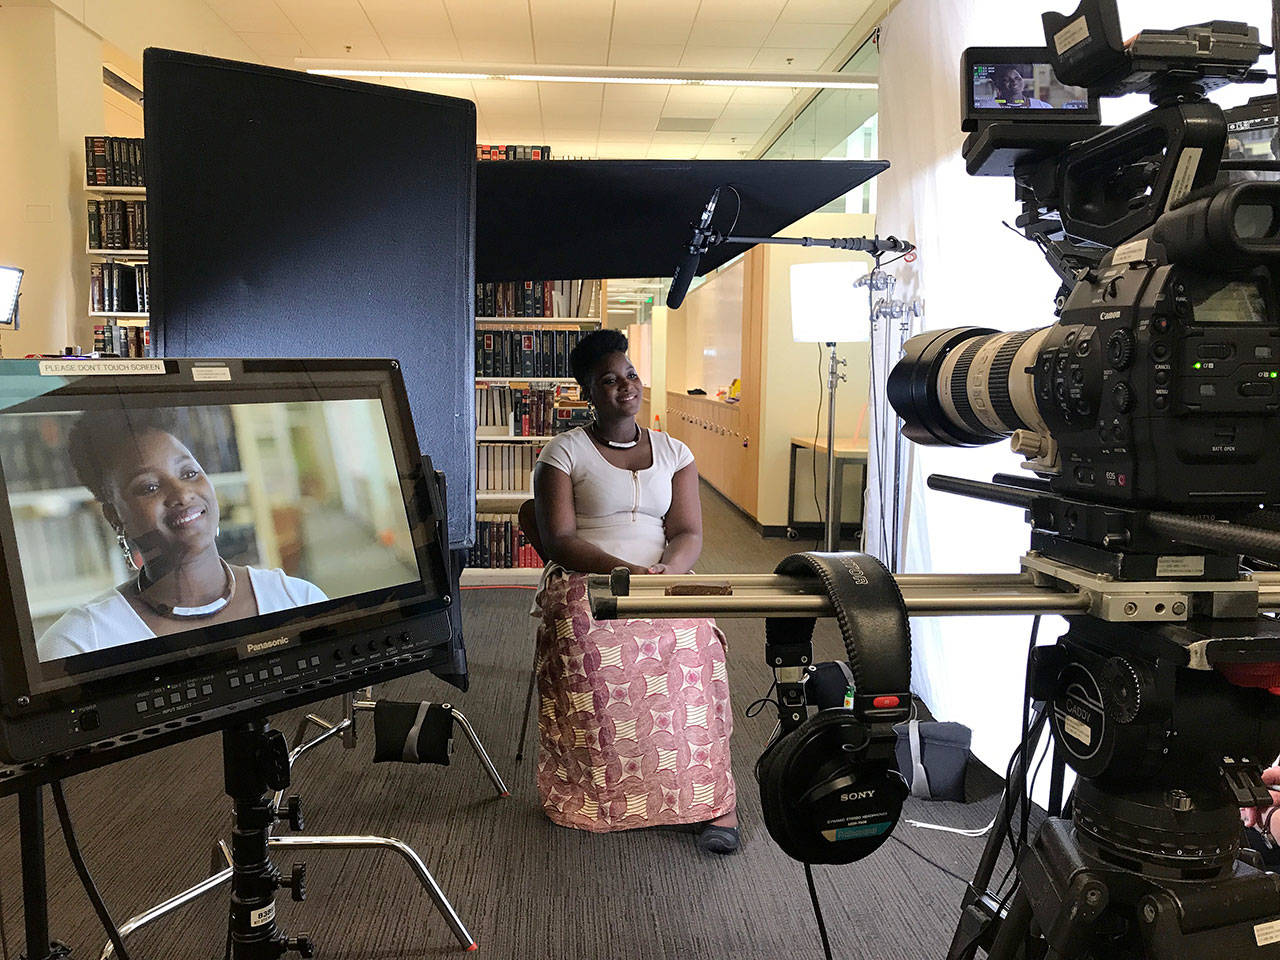 Jane Duggan photo — Isatou Jallow, Seattle resident and asylee from Gambia, is filmed on production of “Little Rebel.” The short documentary was created by some filmmakers involved with the organization Thriving Communities. A viewing is slated for Wednesday.